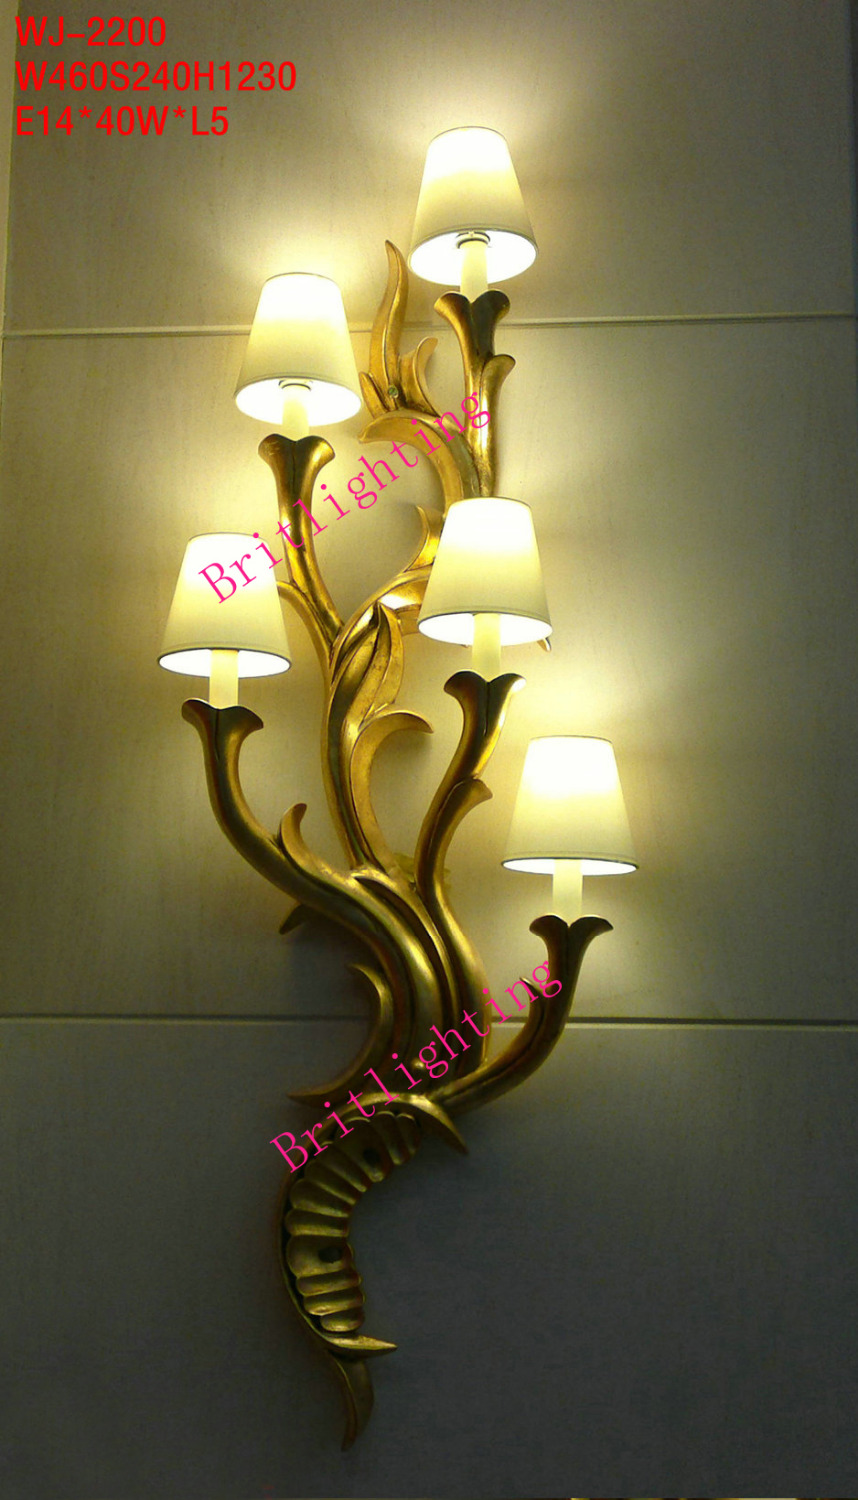 multi-light wall lights el lighting project extra large wall lamp fabric shade classic large wall lights